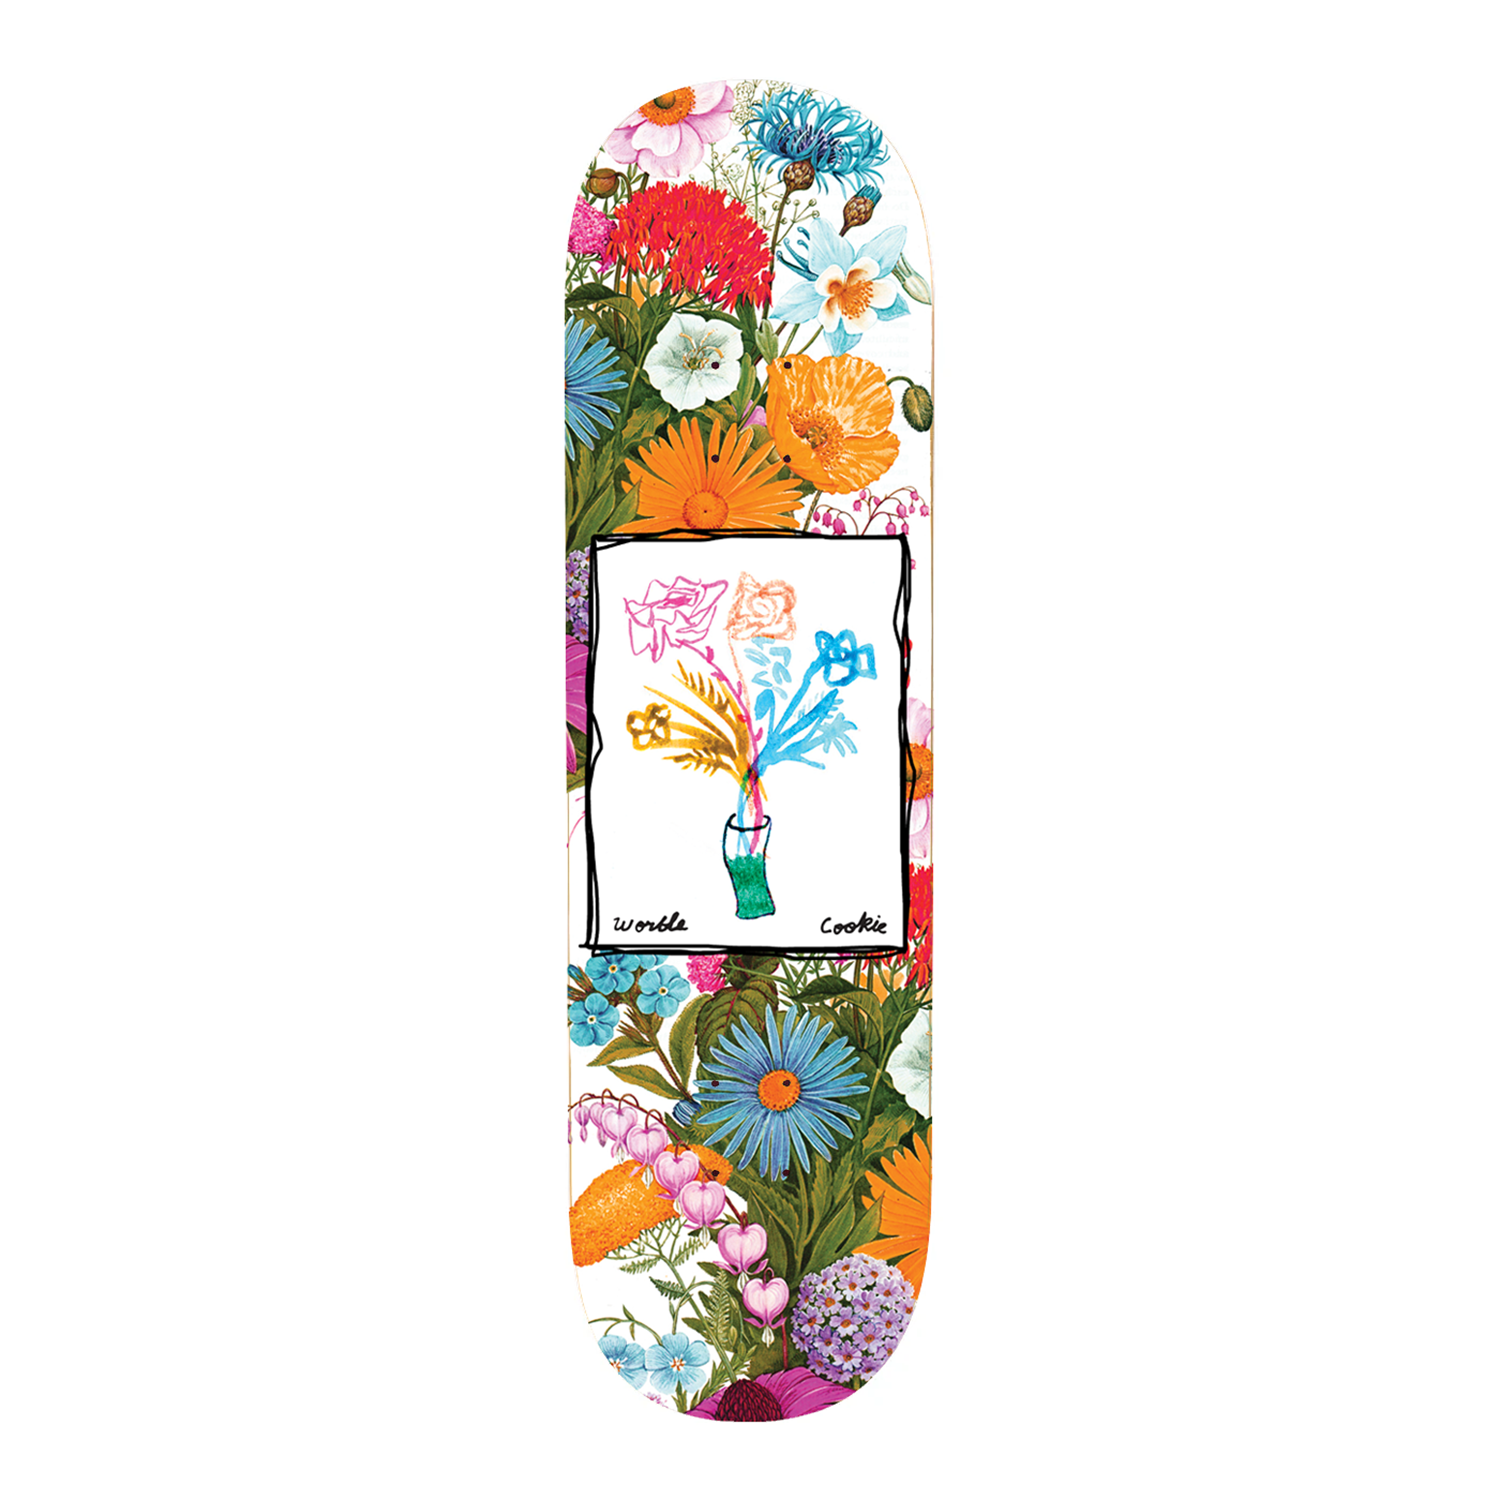 COOKIE - FLOWER SHOP (8.5") DECK FROM WORBLE - BOTTOM